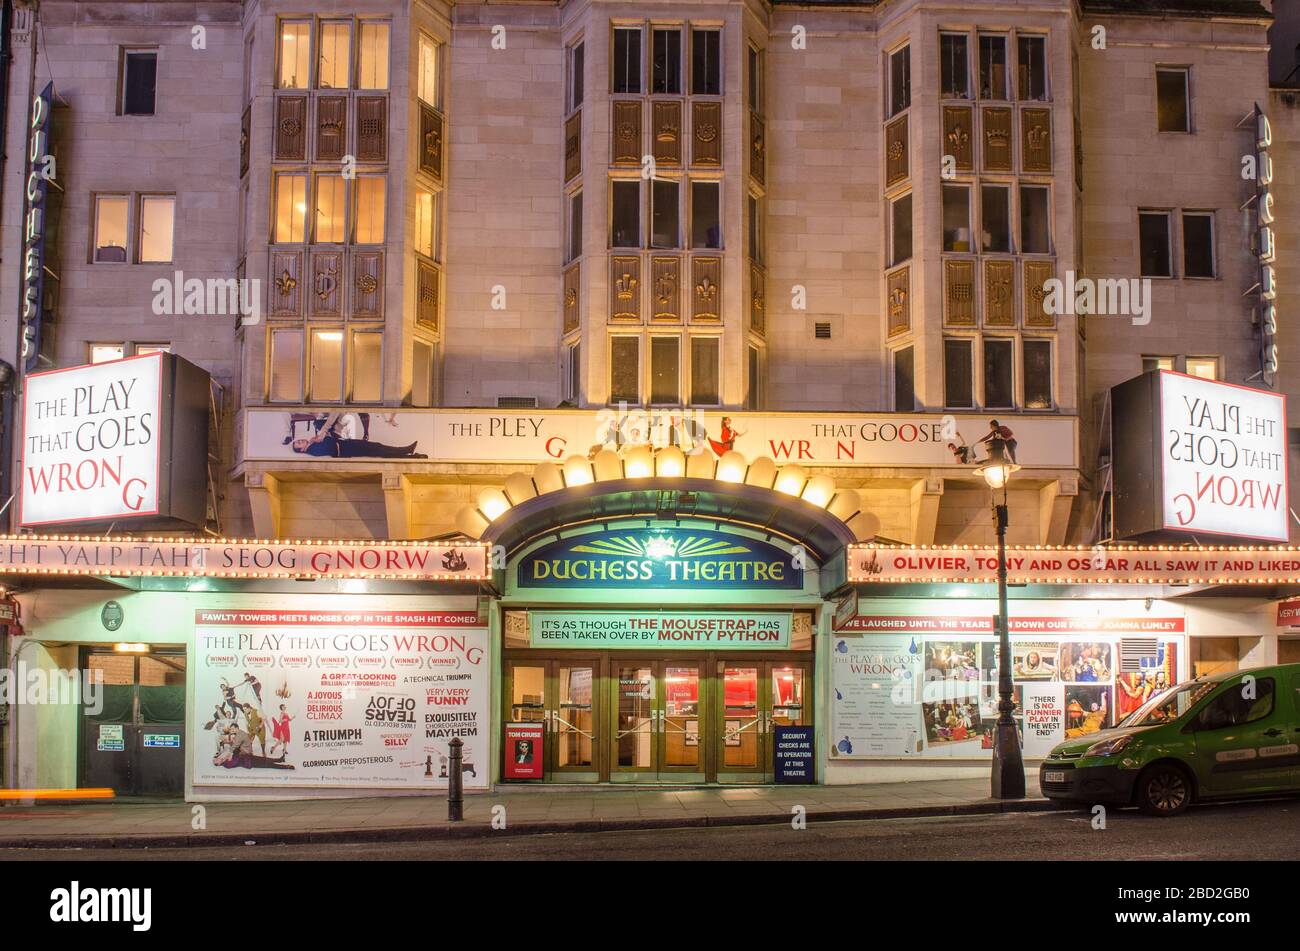 LONDON- The Duchess Theatre located on Catherine Street in London's West End, currently showing the Play That Goes Wrong Stock Photo